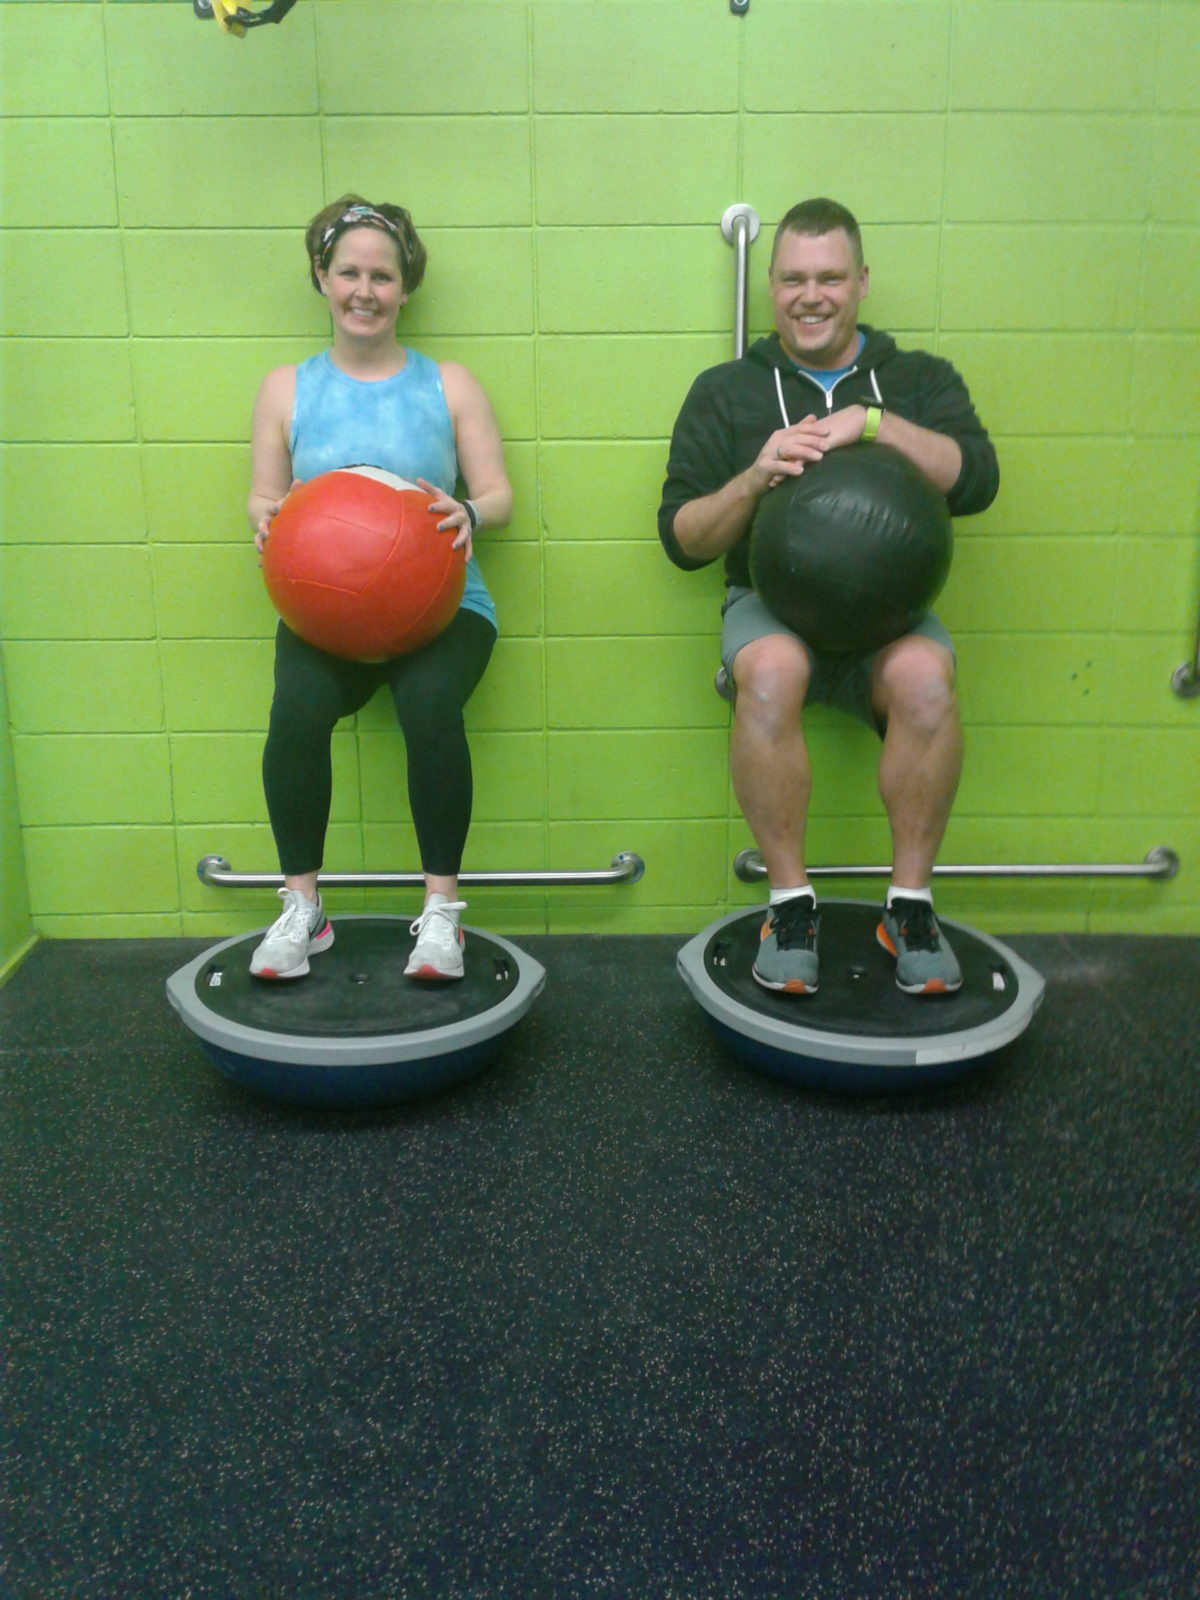 March Client of the Month – Erin D.